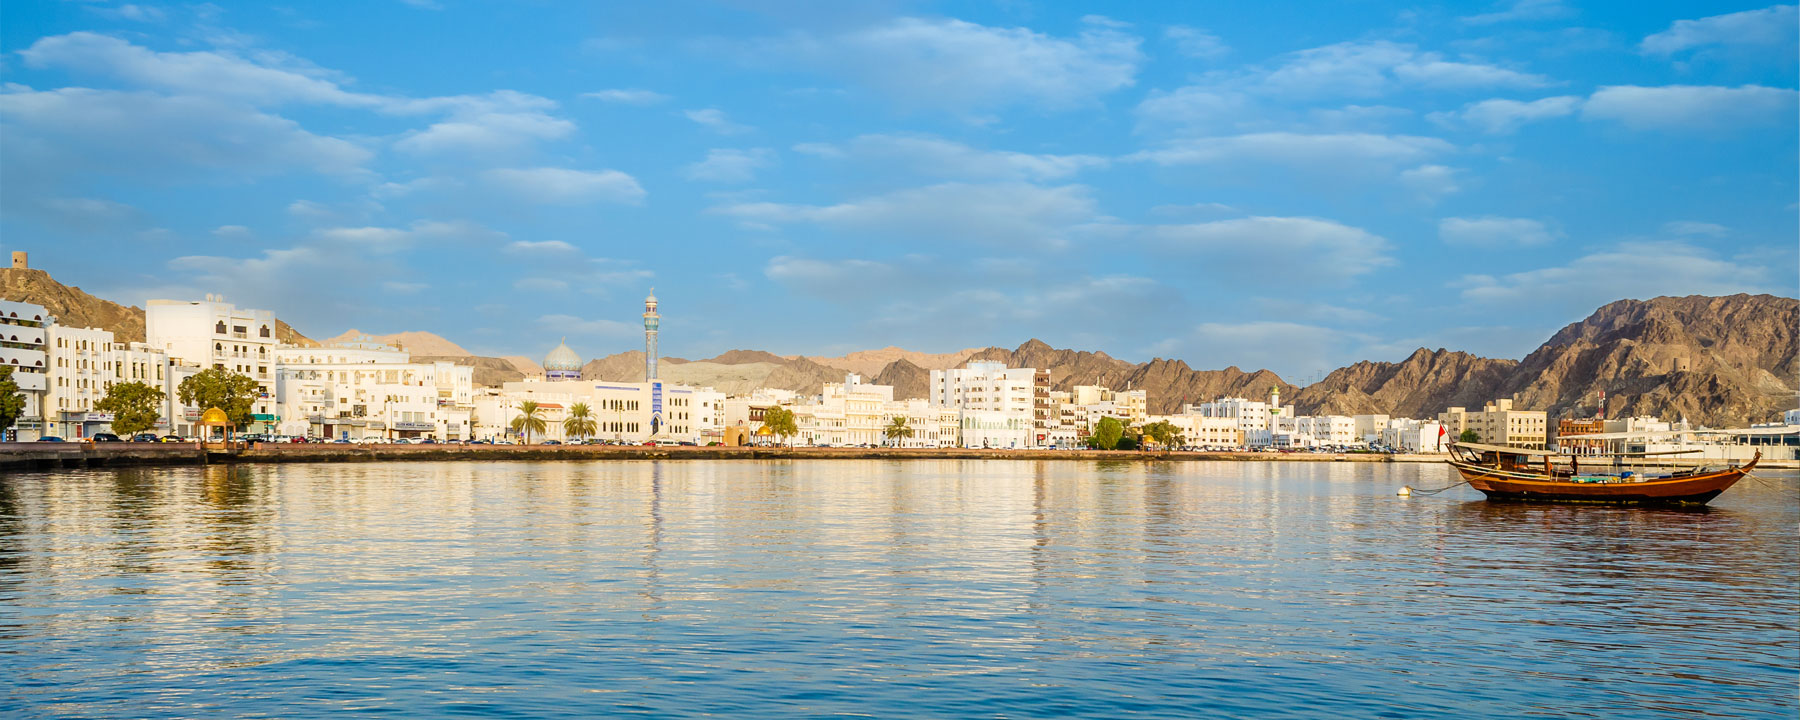 oman tour package holidays